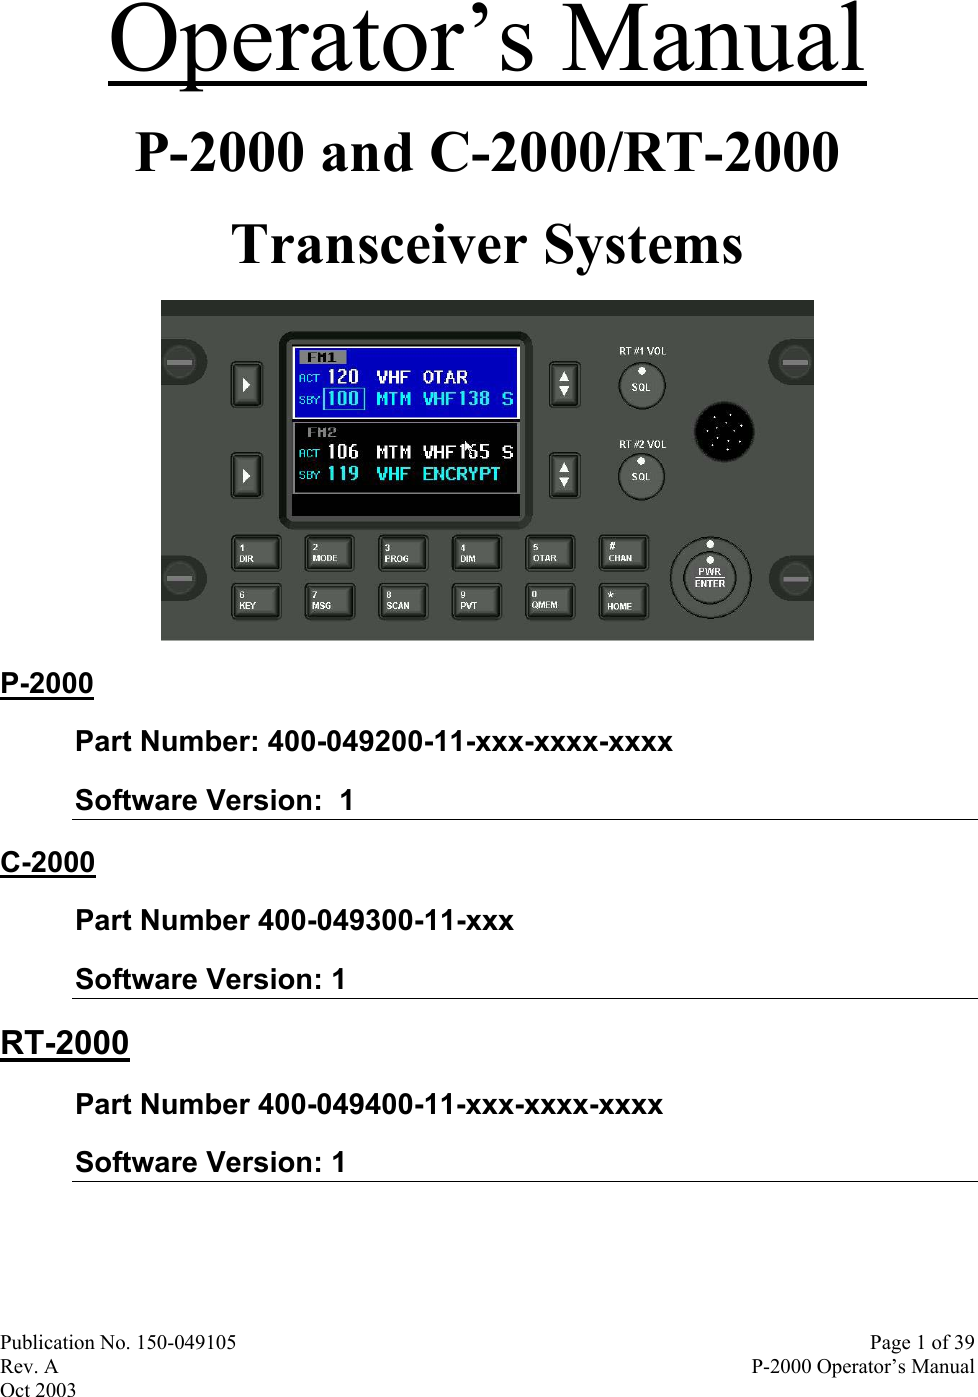 Publication No. 150-049105  Page 1 of 39 Rev. A  P-2000 Operator’s Manual Oct 2003 Operator’s Manual P-2000 and C-2000/RT-2000 Transceiver Systems  P-2000 Part Number: 400-049200-11-xxx-xxxx-xxxx Software Version:  1   C-2000 Part Number 400-049300-11-xxx Software Version: 1  RT-2000 Part Number 400-049400-11-xxx-xxxx-xxxx Software Version: 1   